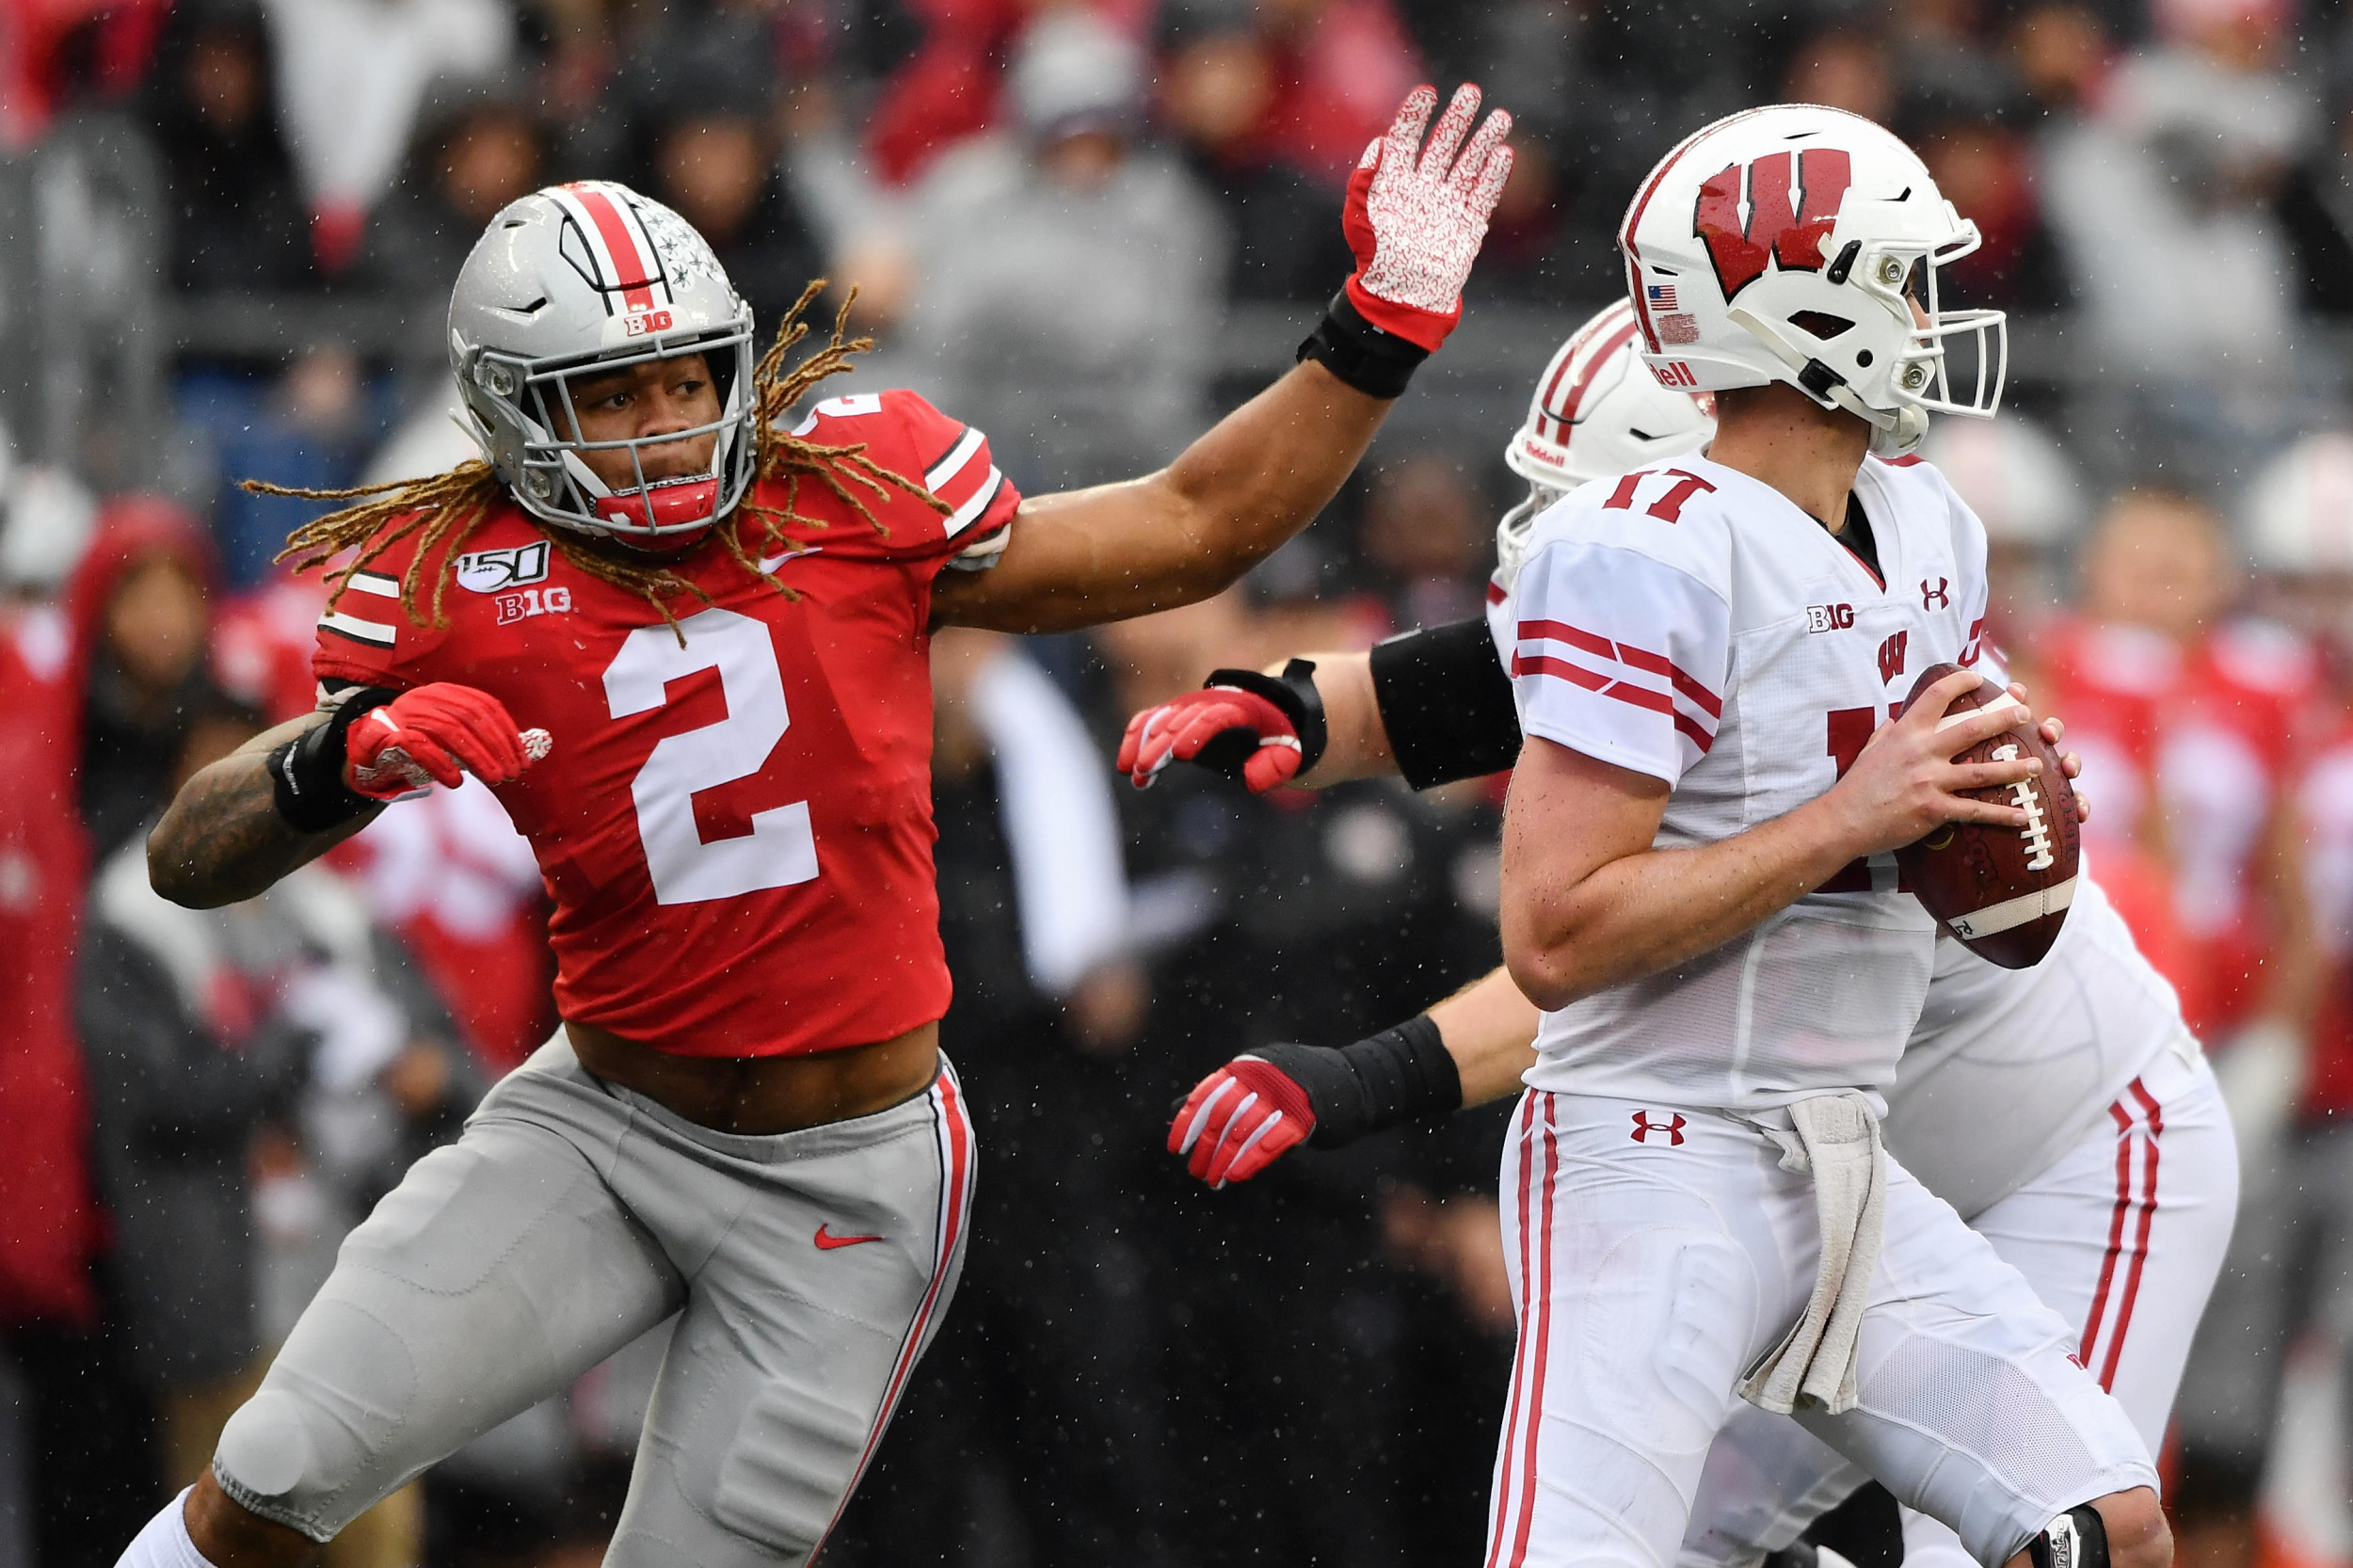 Ohio State's Chase Young Is Top 4 Favorite Among Sportsbooks To Win